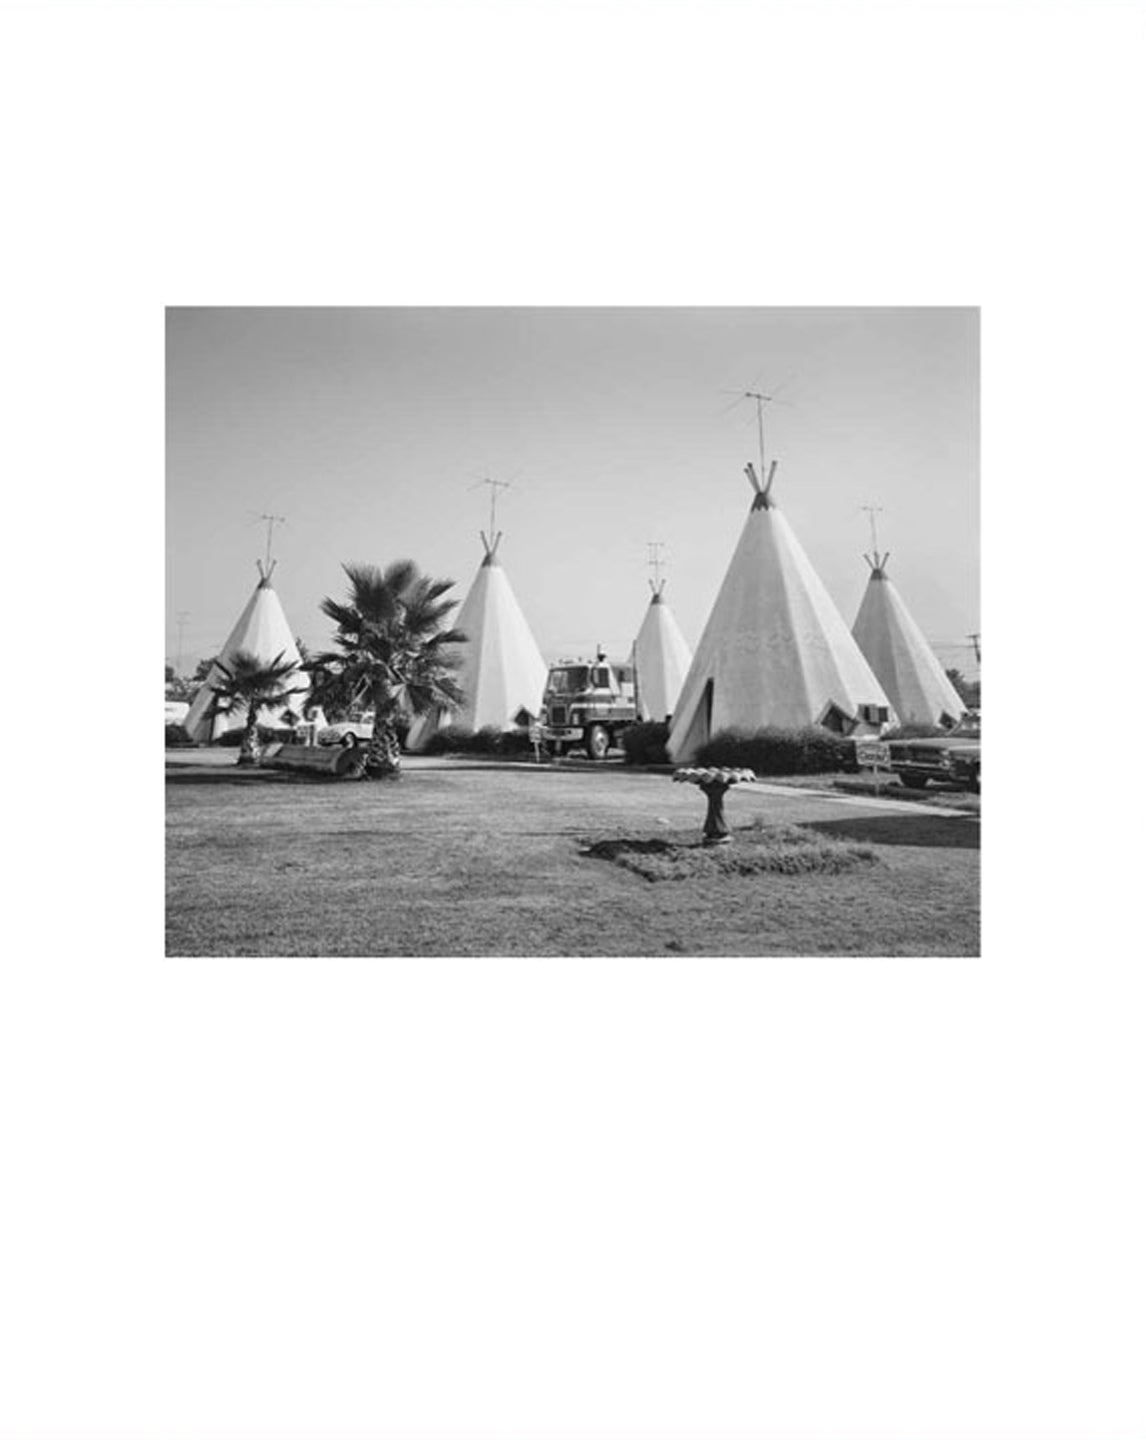 NZ Library #1: John Schott: Route 66, Special Limited Edition (with Gelatin Silver Contact Print "Untitled" from the Series "Route 66 Motels," Tipis with Television Antennas, Truck and Palm Trees) (NZ Library - Set One, Volume Six)